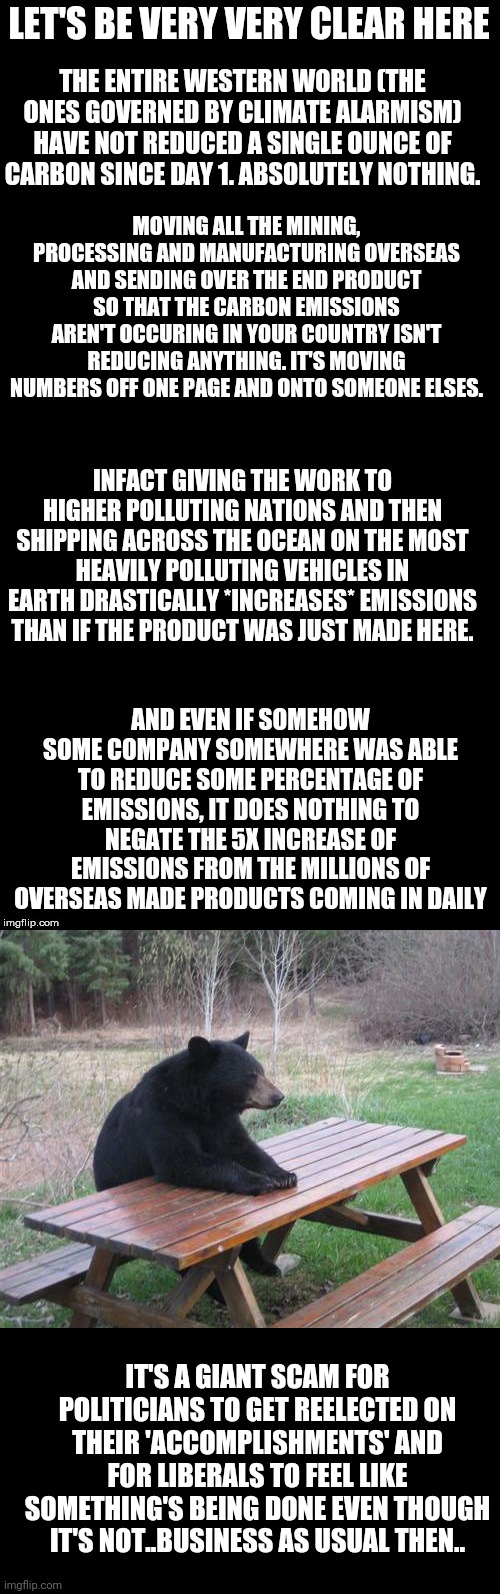 LET'S BE VERY VERY CLEAR HERE; THE ENTIRE WESTERN WORLD (THE ONES GOVERNED BY CLIMATE ALARMISM) HAVE NOT REDUCED A SINGLE OUNCE OF CARBON SINCE DAY 1. ABSOLUTELY NOTHING. MOVING ALL THE MINING, PROCESSING AND MANUFACTURING OVERSEAS AND SENDING OVER THE END PRODUCT SO THAT THE CARBON EMISSIONS AREN'T OCCURING IN YOUR COUNTRY ISN'T REDUCING ANYTHING. IT'S MOVING NUMBERS OFF ONE PAGE AND ONTO SOMEONE ELSES. INFACT GIVING THE WORK TO HIGHER POLLUTING NATIONS AND THEN SHIPPING ACROSS THE OCEAN ON THE MOST HEAVILY POLLUTING VEHICLES IN EARTH DRASTICALLY *INCREASES* EMISSIONS THAN IF THE PRODUCT WAS JUST MADE HERE. AND EVEN IF SOMEHOW SOME COMPANY SOMEWHERE WAS ABLE TO REDUCE SOME PERCENTAGE OF EMISSIONS, IT DOES NOTHING TO NEGATE THE 5X INCREASE OF EMISSIONS FROM THE MILLIONS OF OVERSEAS MADE PRODUCTS COMING IN DAILY; IT'S A GIANT SCAM FOR POLITICIANS TO GET REELECTED ON THEIR 'ACCOMPLISHMENTS' AND FOR LIBERALS TO FEEL LIKE SOMETHING'S BEING DONE EVEN THOUGH IT'S NOT..BUSINESS AS USUAL THEN.. | image tagged in double long black template,memes,bad luck bear | made w/ Imgflip meme maker